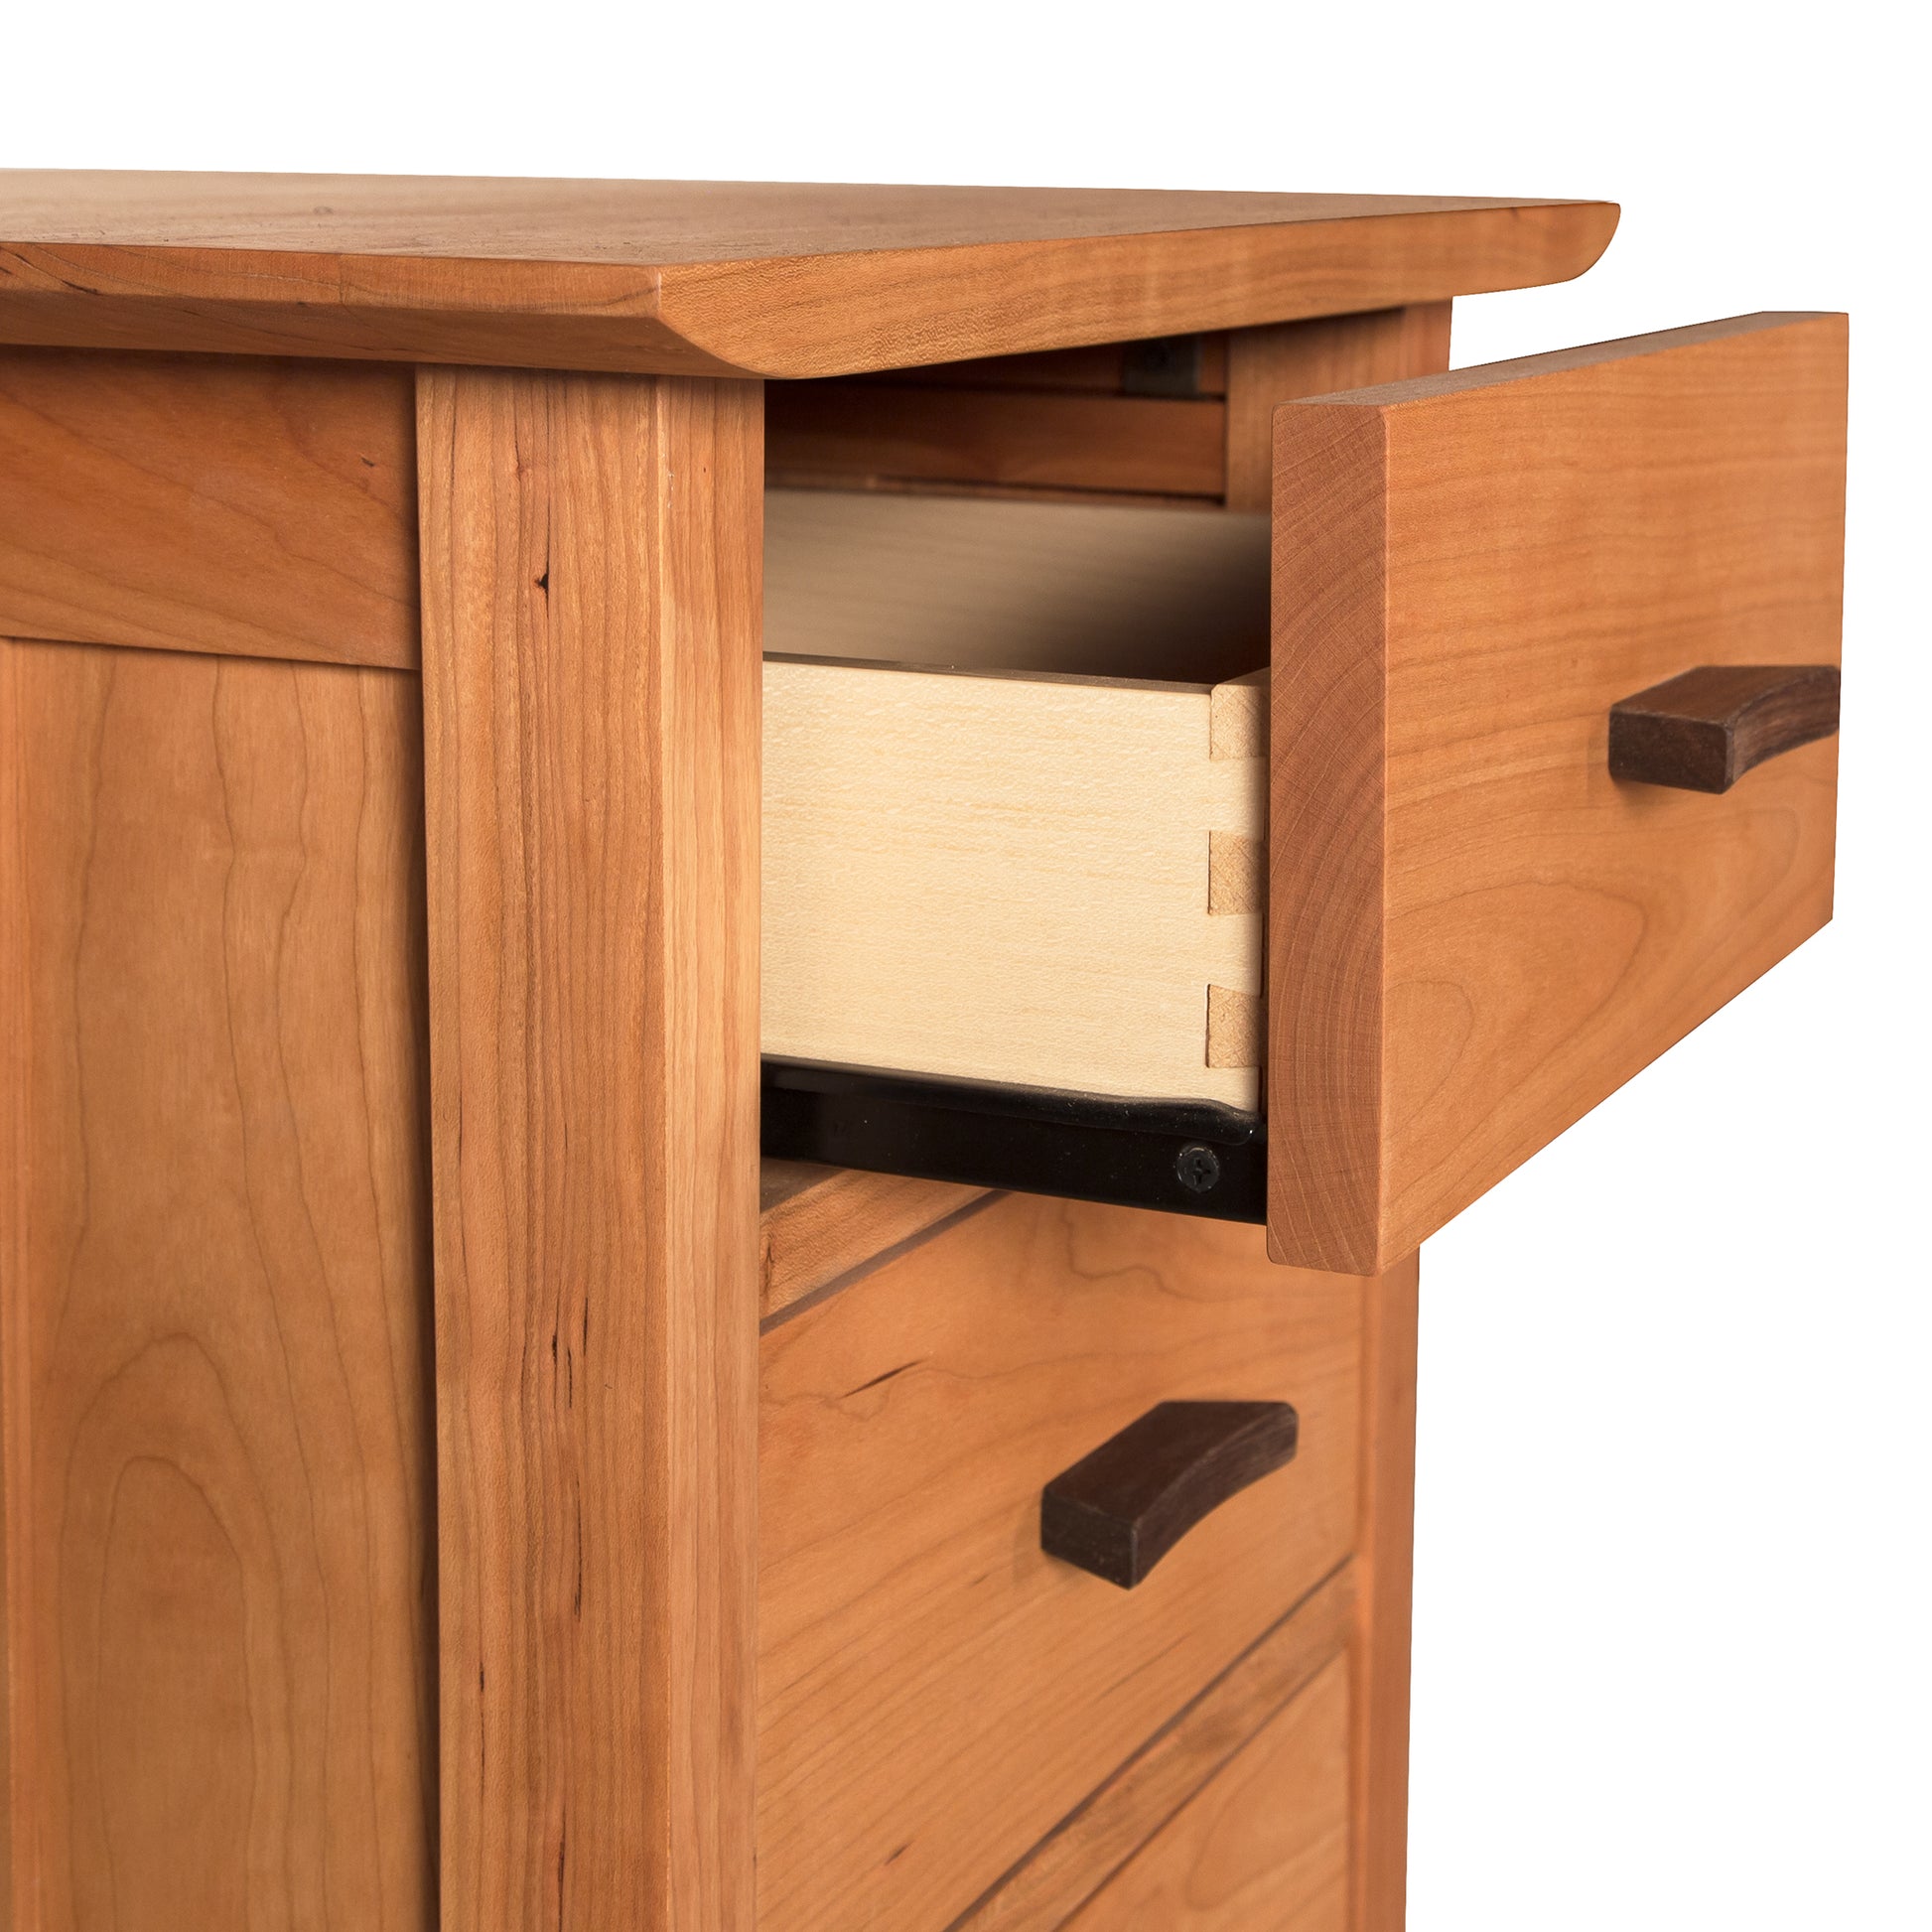 Contemporary Craftsman 3-Drawer Nightstand from Vermont Furniture Designs in solid wood with an eco-friendly oil finish, featuring an open drawer that showcases the construction and dovetail joints.